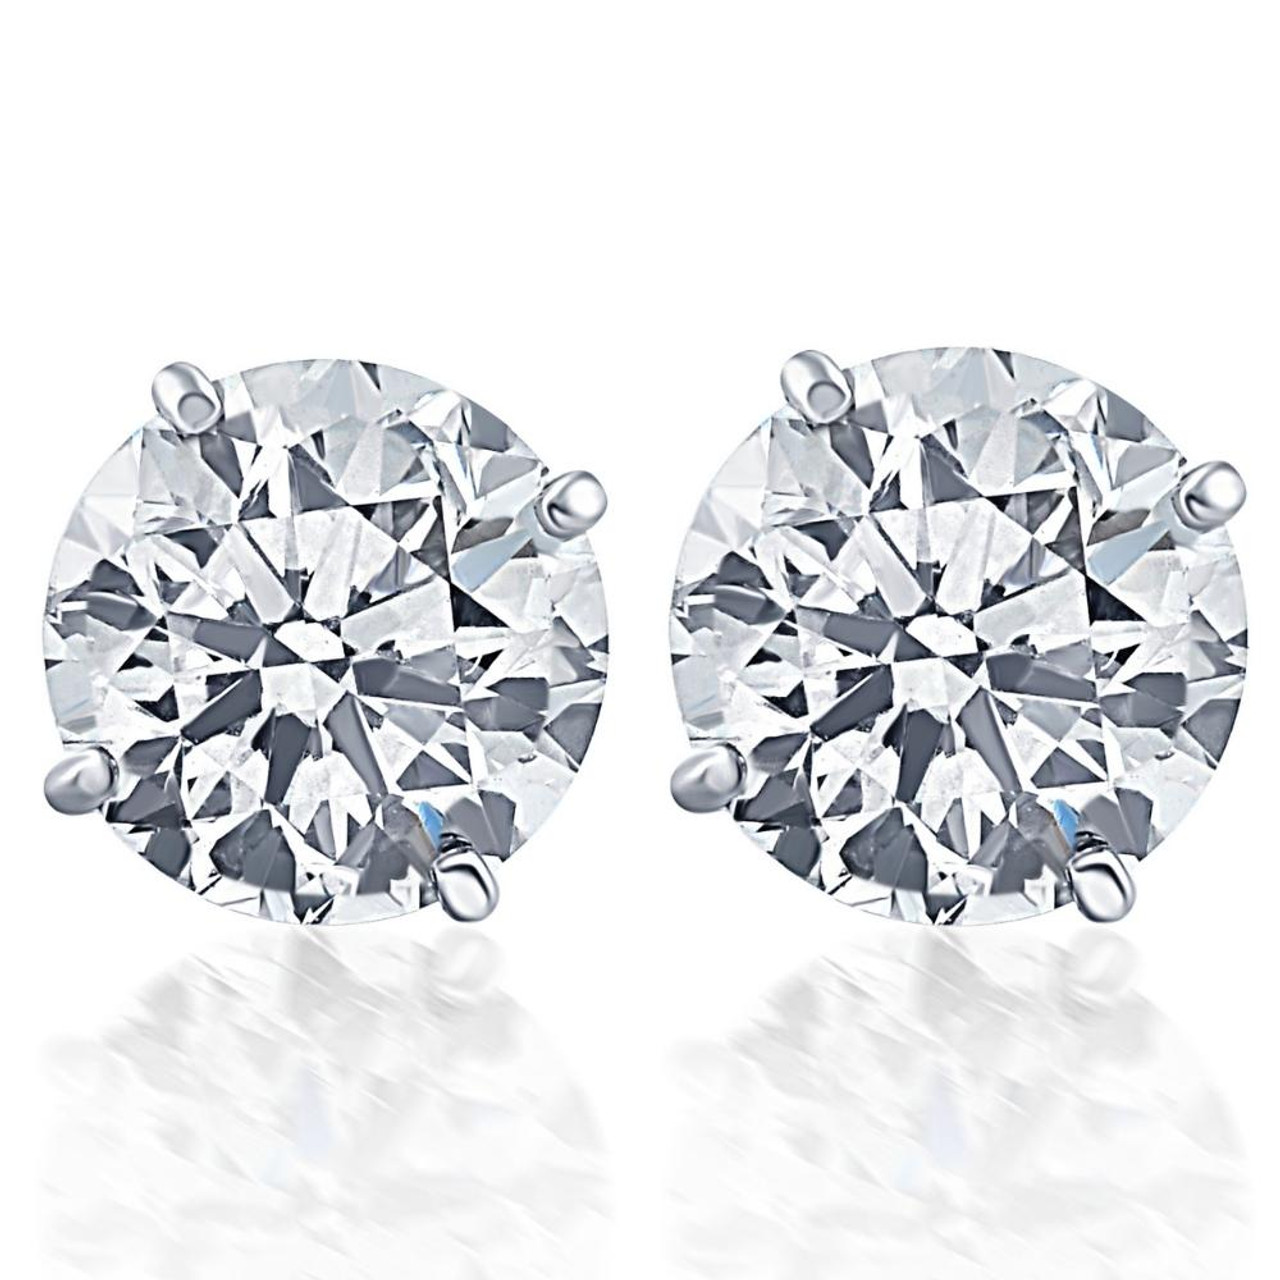 Good products online NOW Never Lose Your Diamond Earrings: What